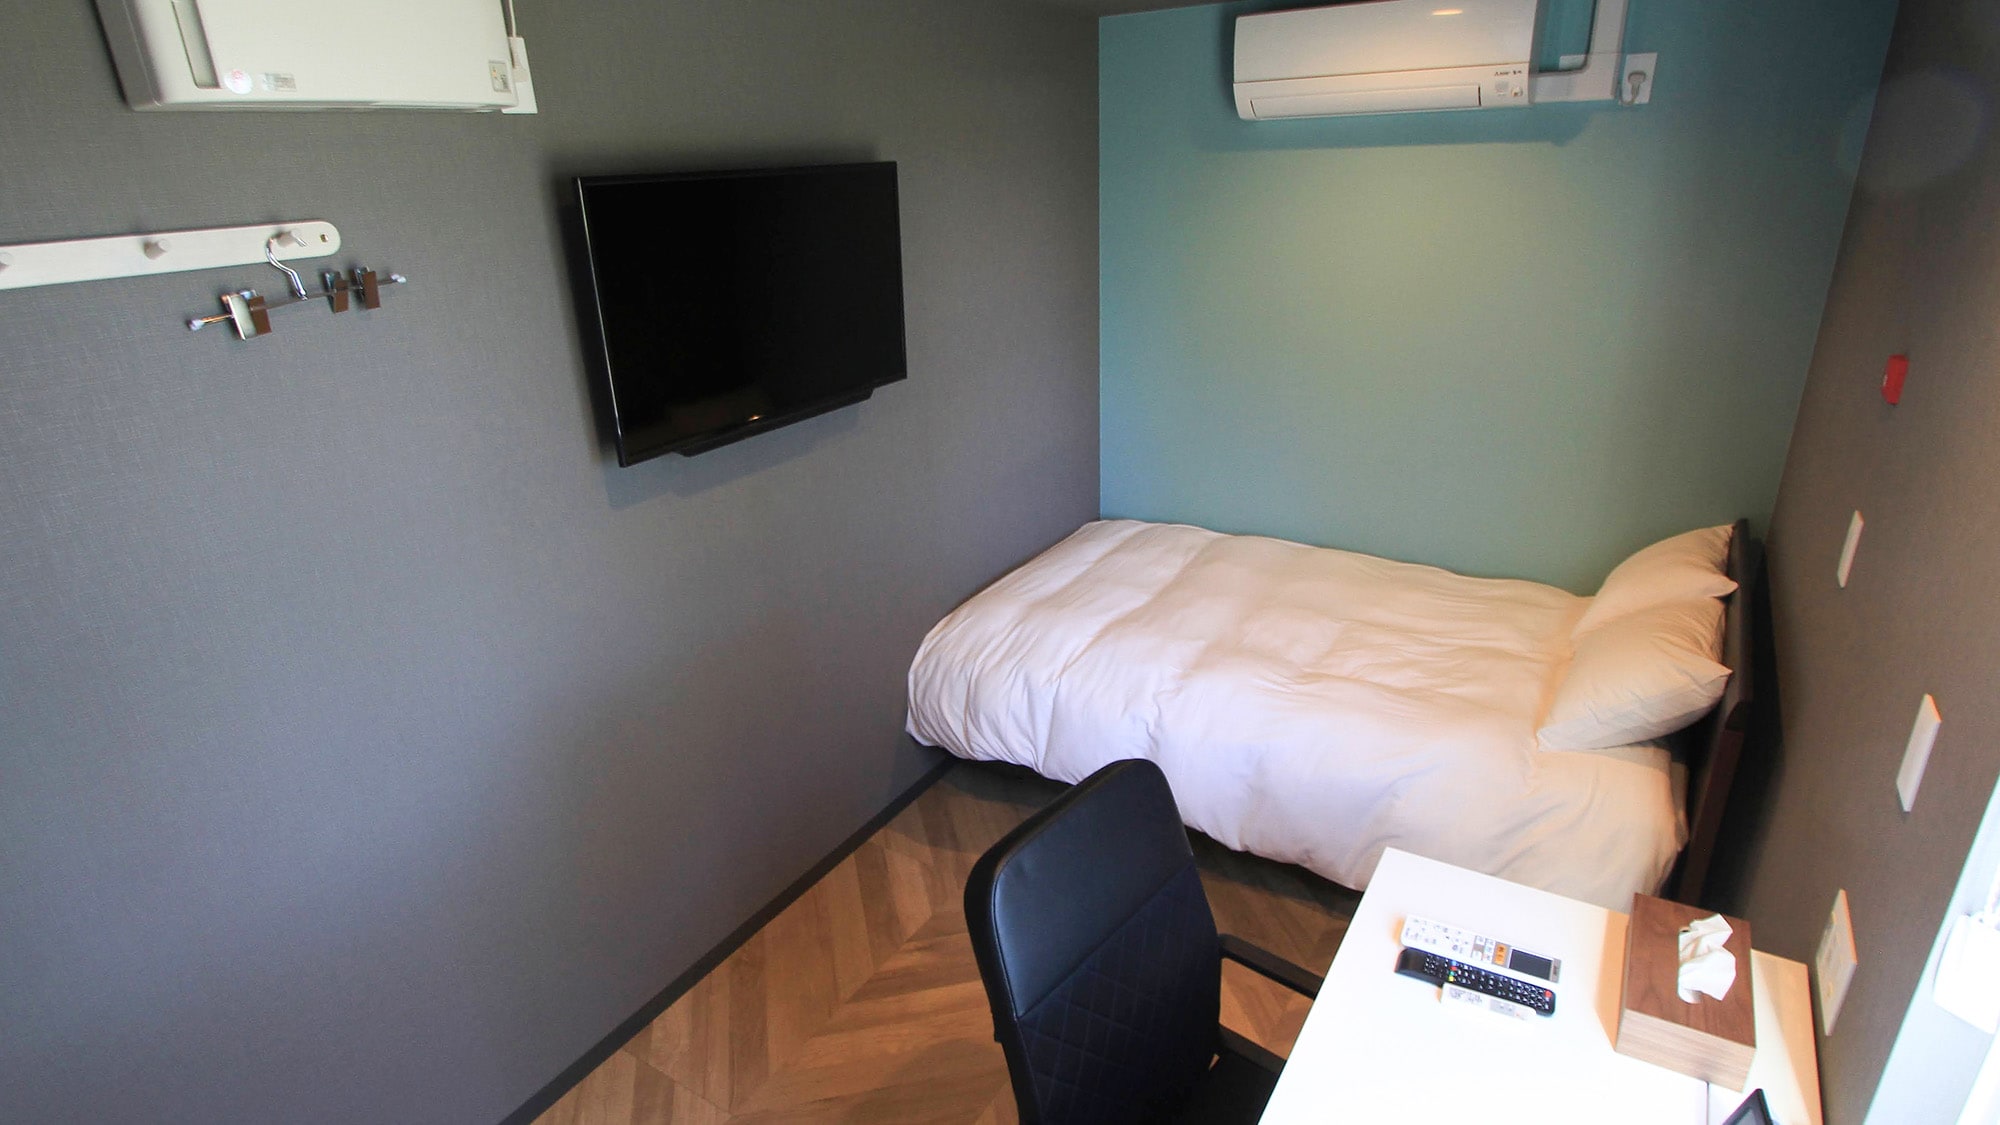 ・[Semi-double room] The room has a calm atmosphere with a mint green and gray color scheme.